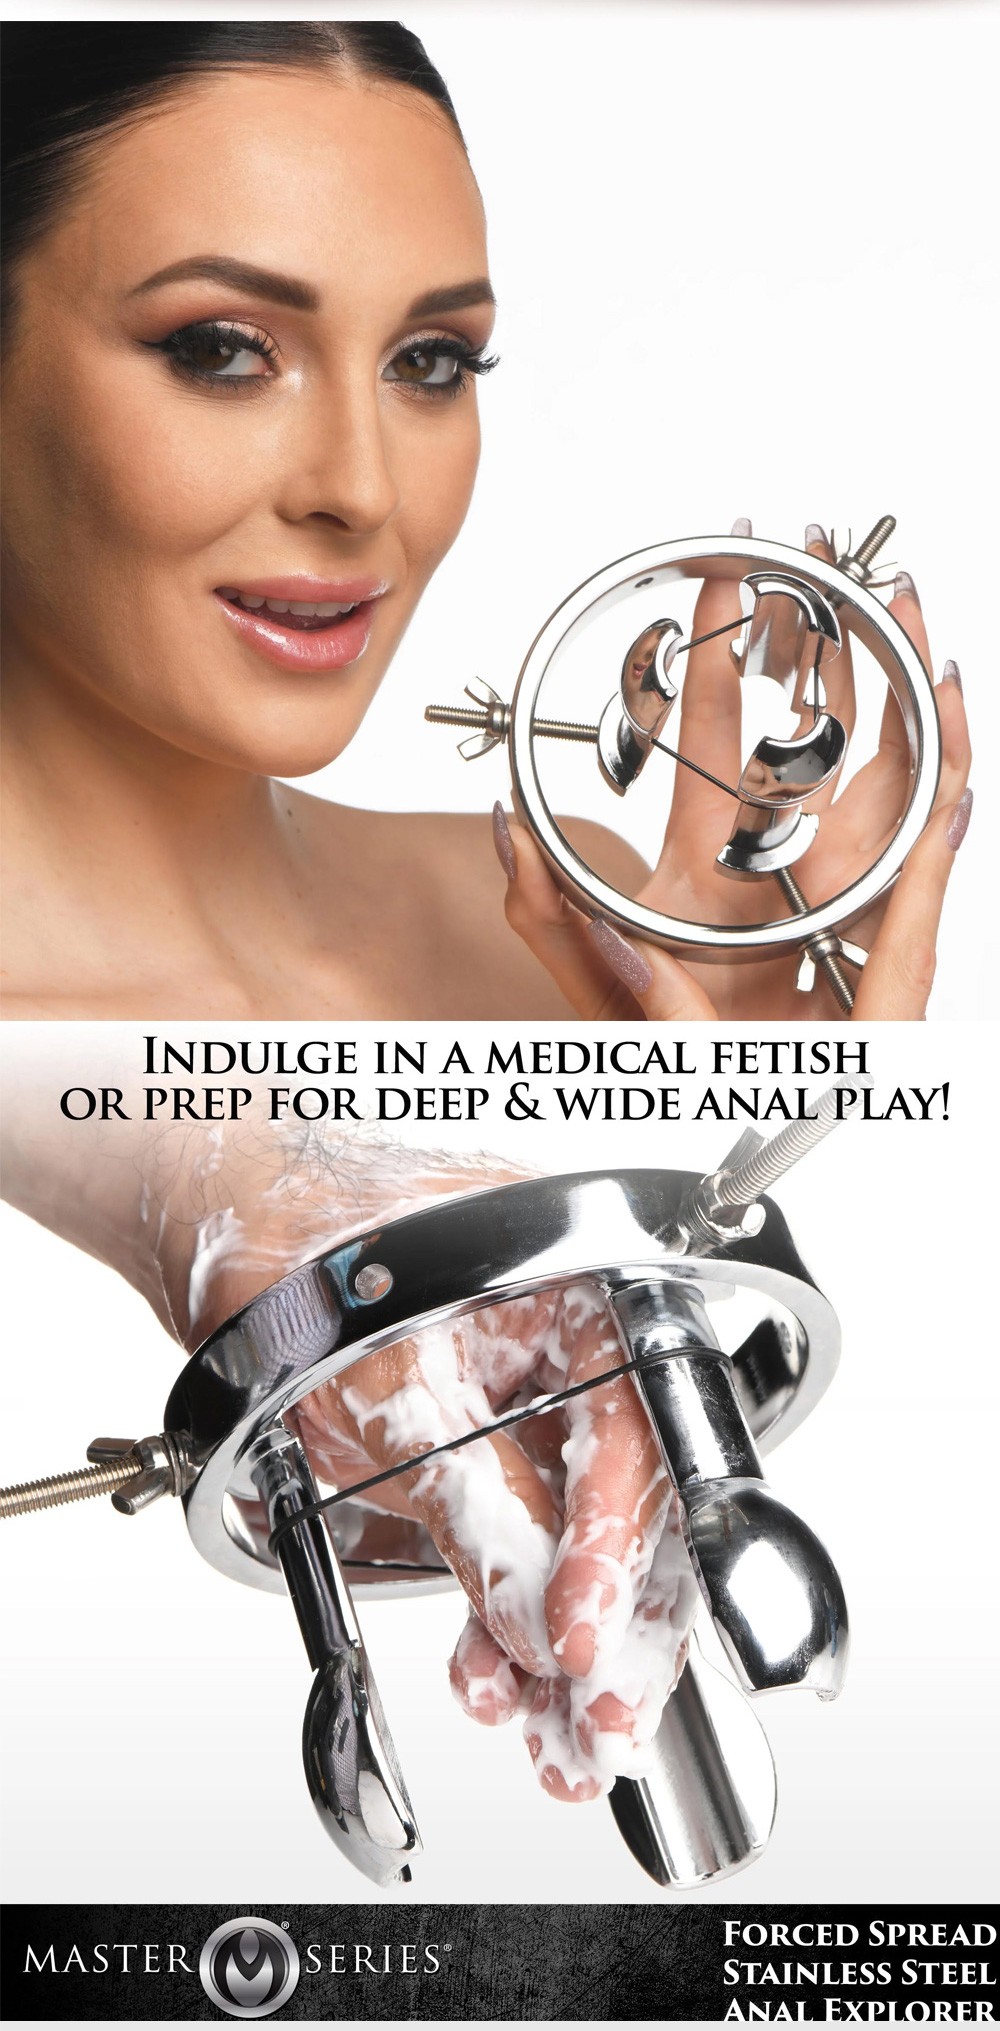 Master Series Forced Spread Stainless Steel Anal Explorer s